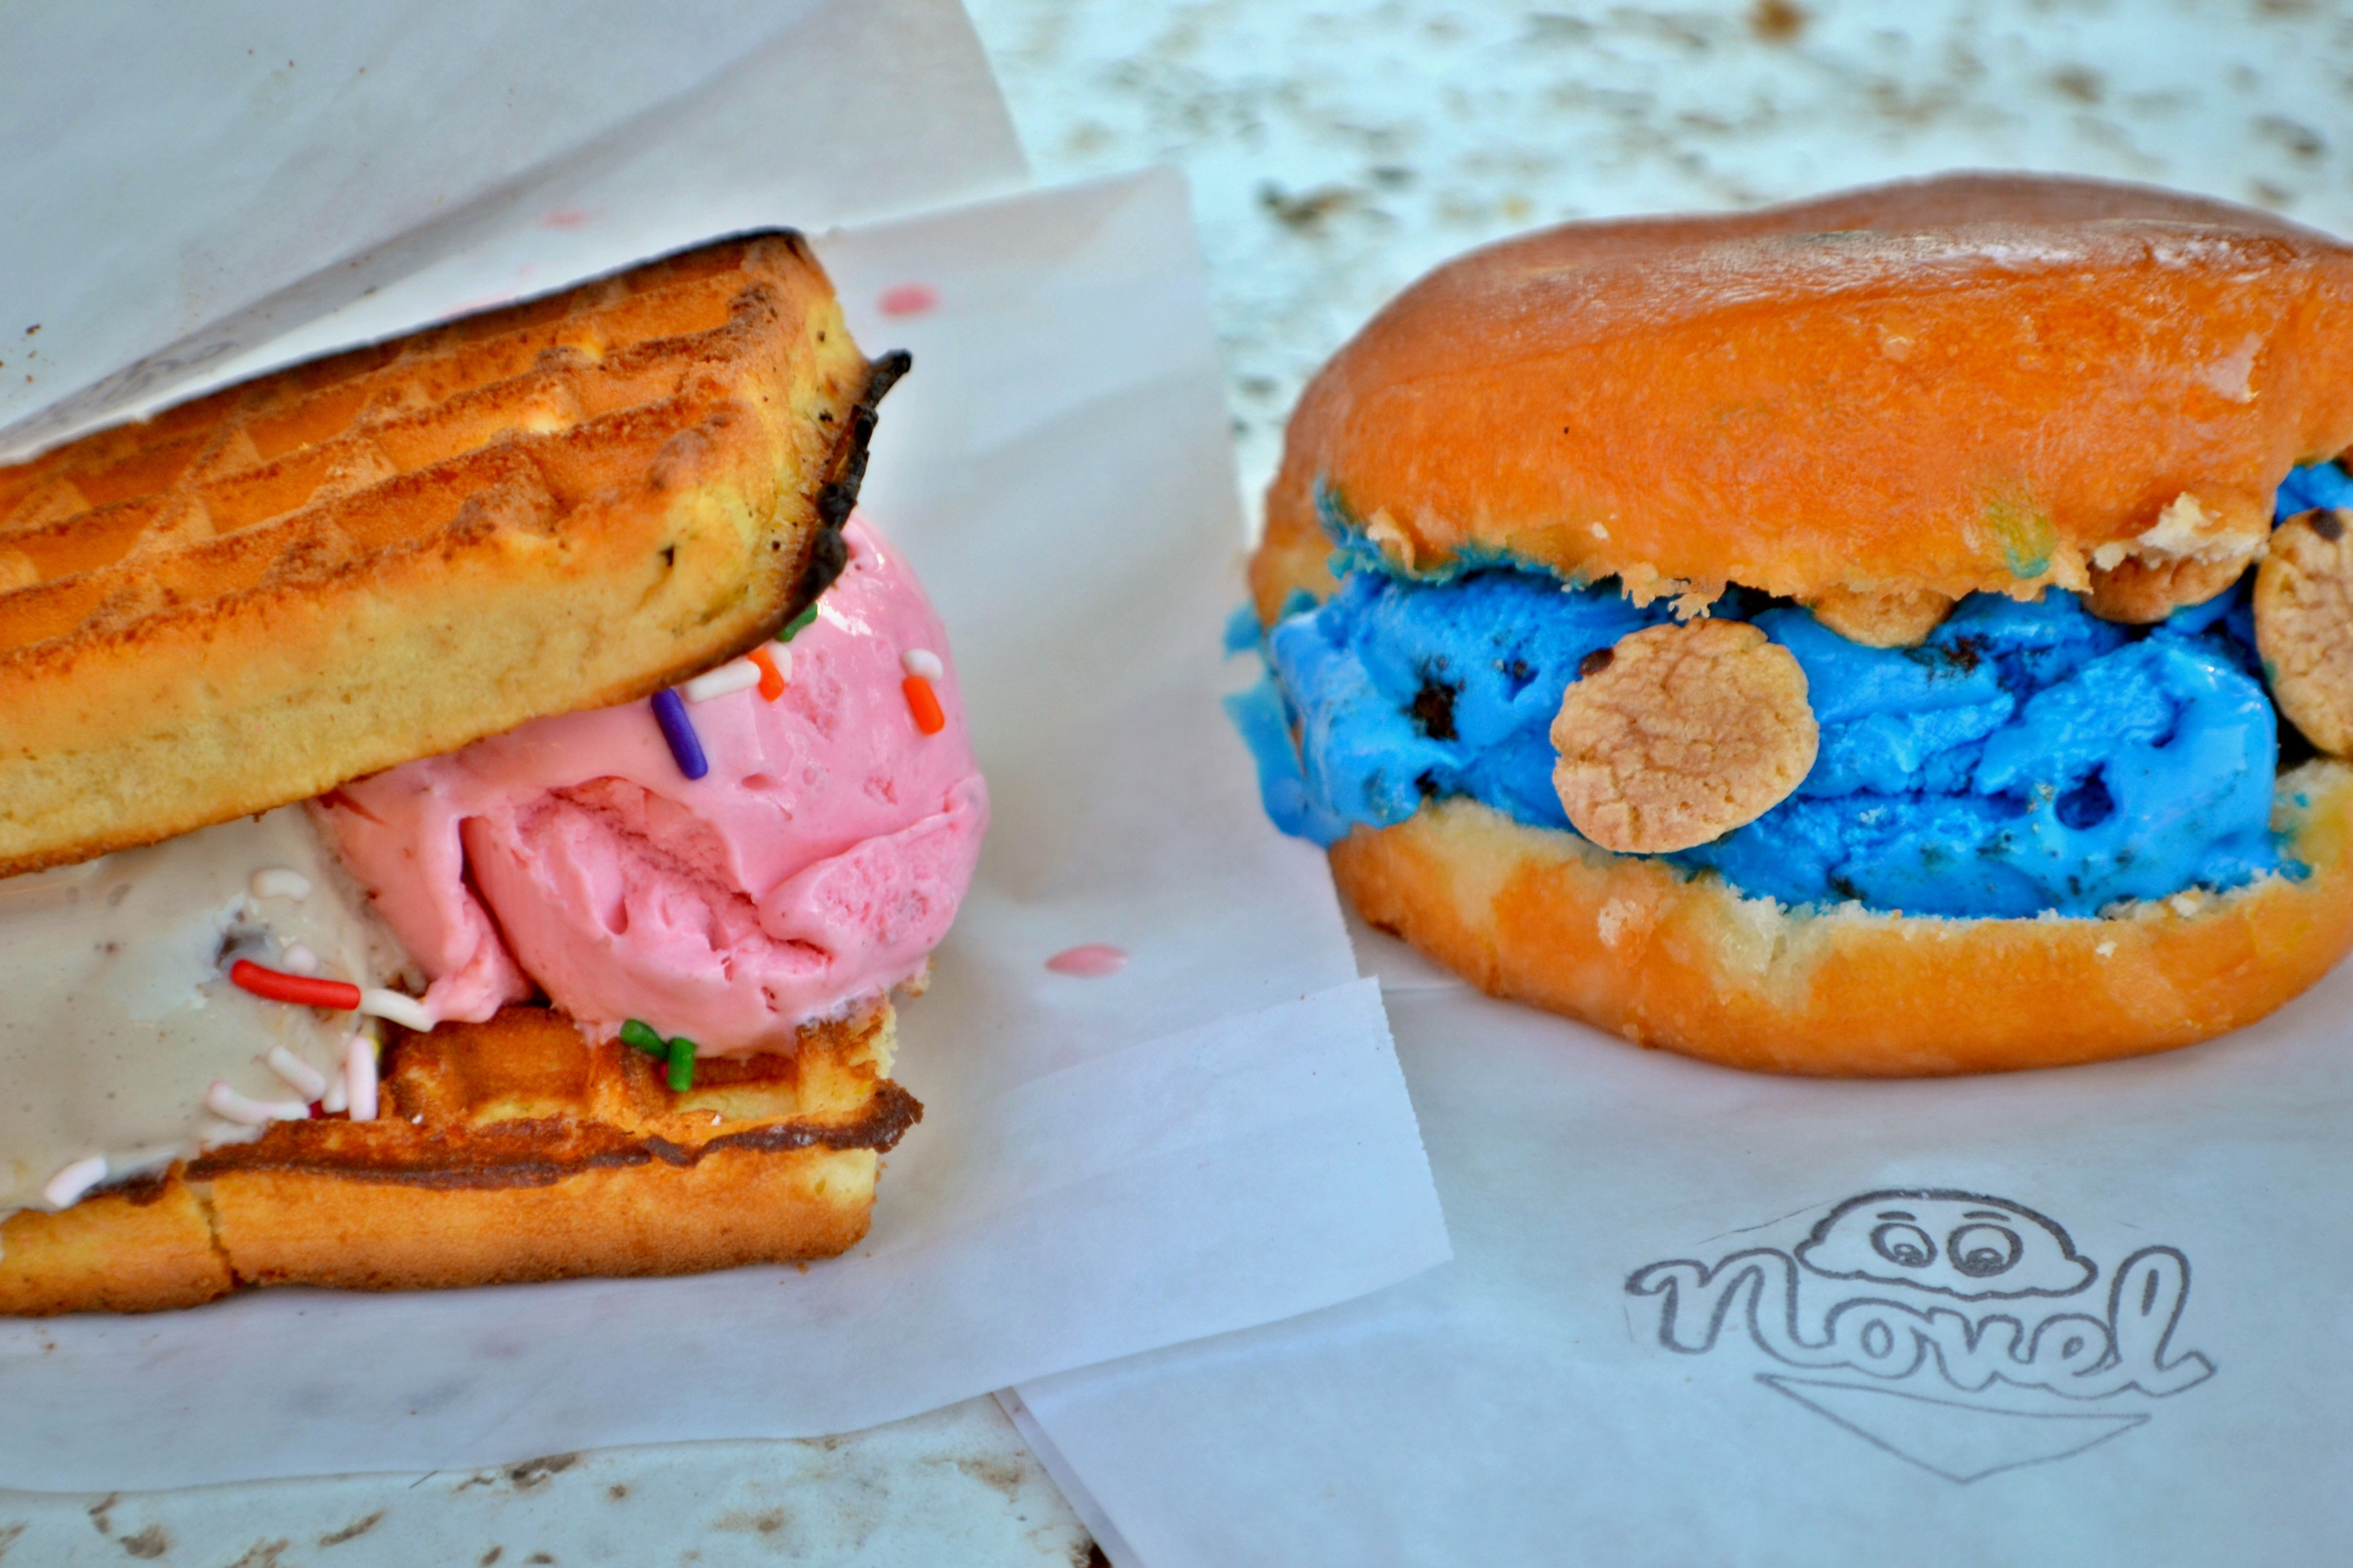 Kenny's got the scoop on where you can find a gourmet ice cream sandwich